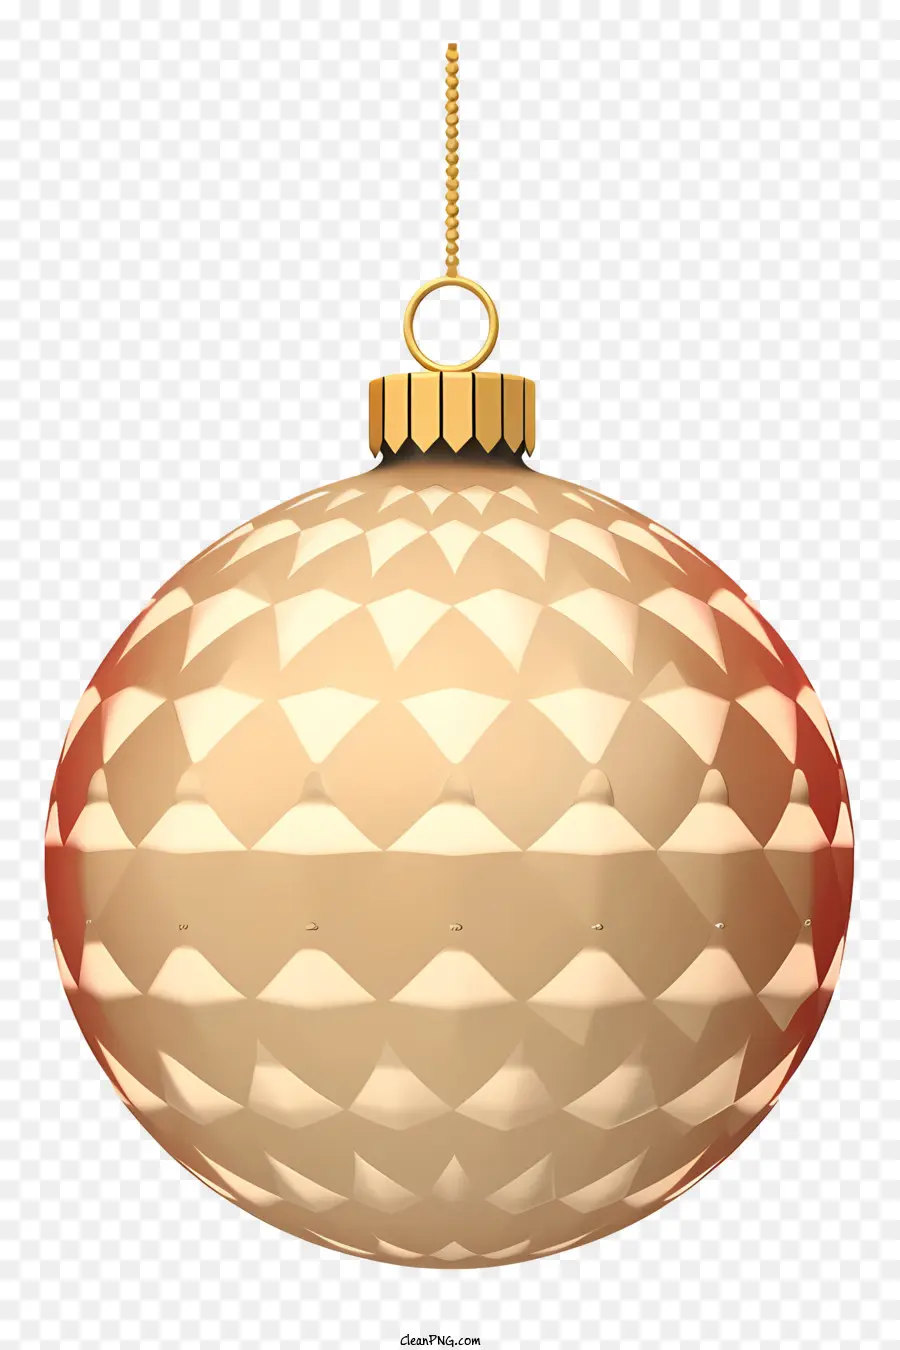 beige and golden ornament sphere ornament repeating pattern of circles triangular shape arrangement hanging ornament